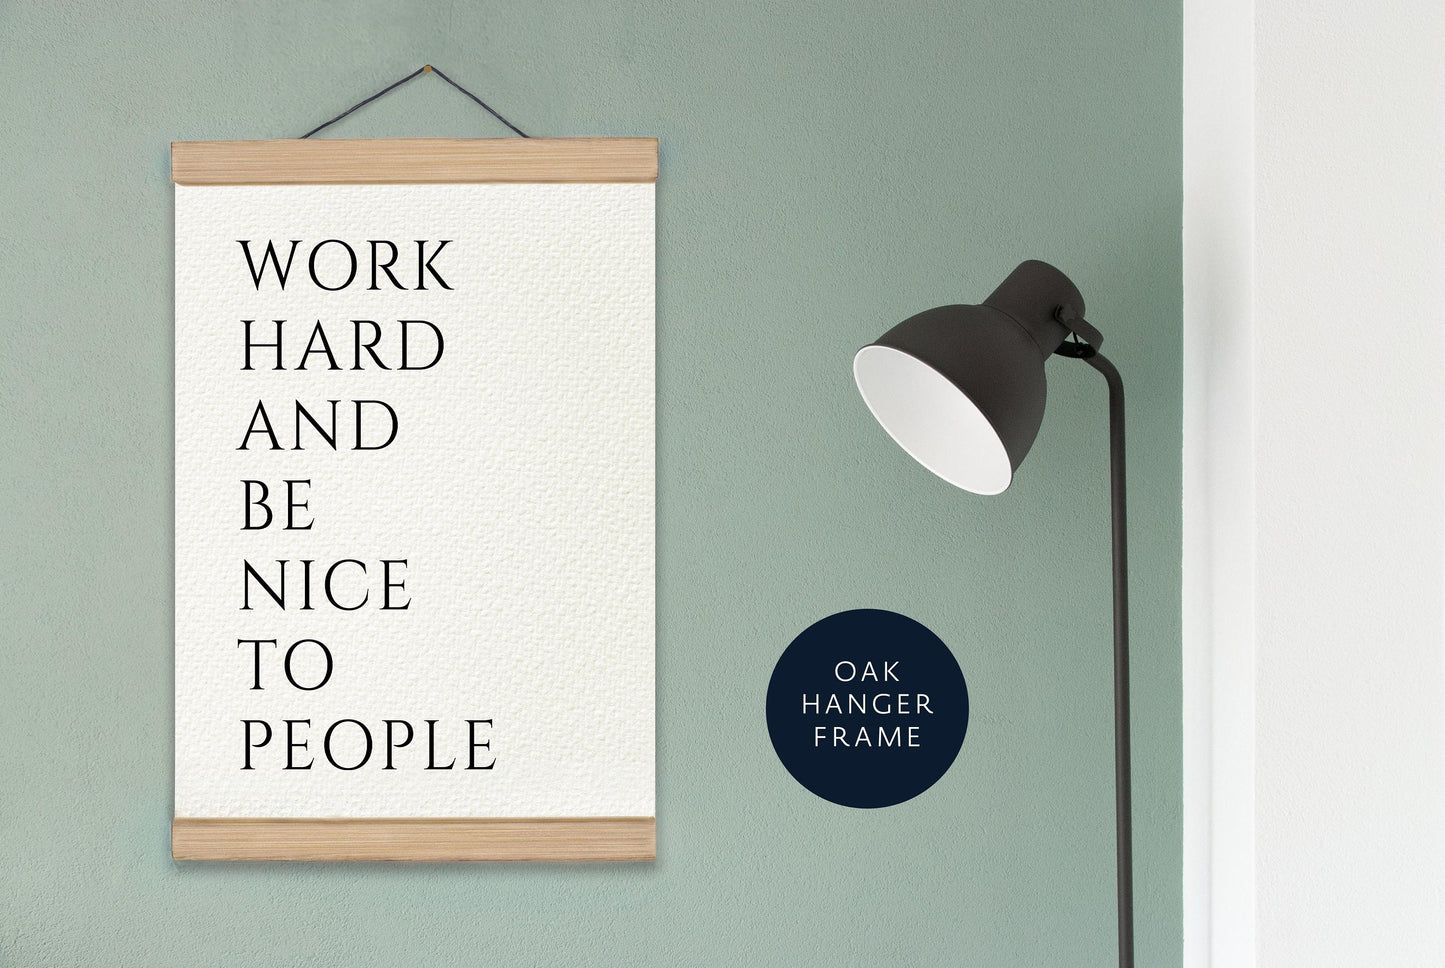 Work hard and be nice to people Print, Work hard poster, Be nice print, Framed Quote Poster, Inspirational Quote, Motivational Poster